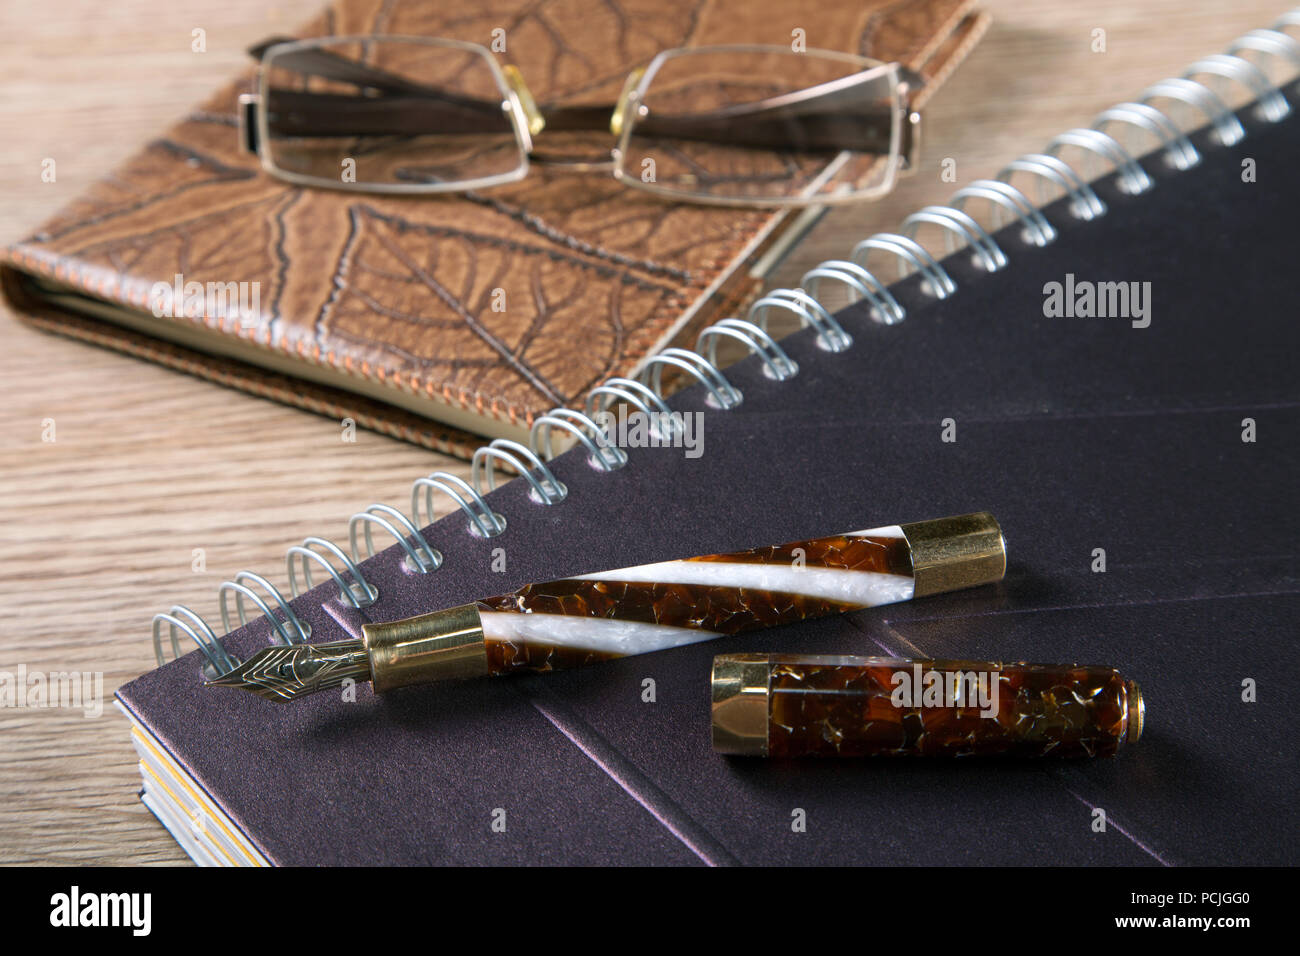 fountain pens and diaries with leather cover business still life Stock Photo